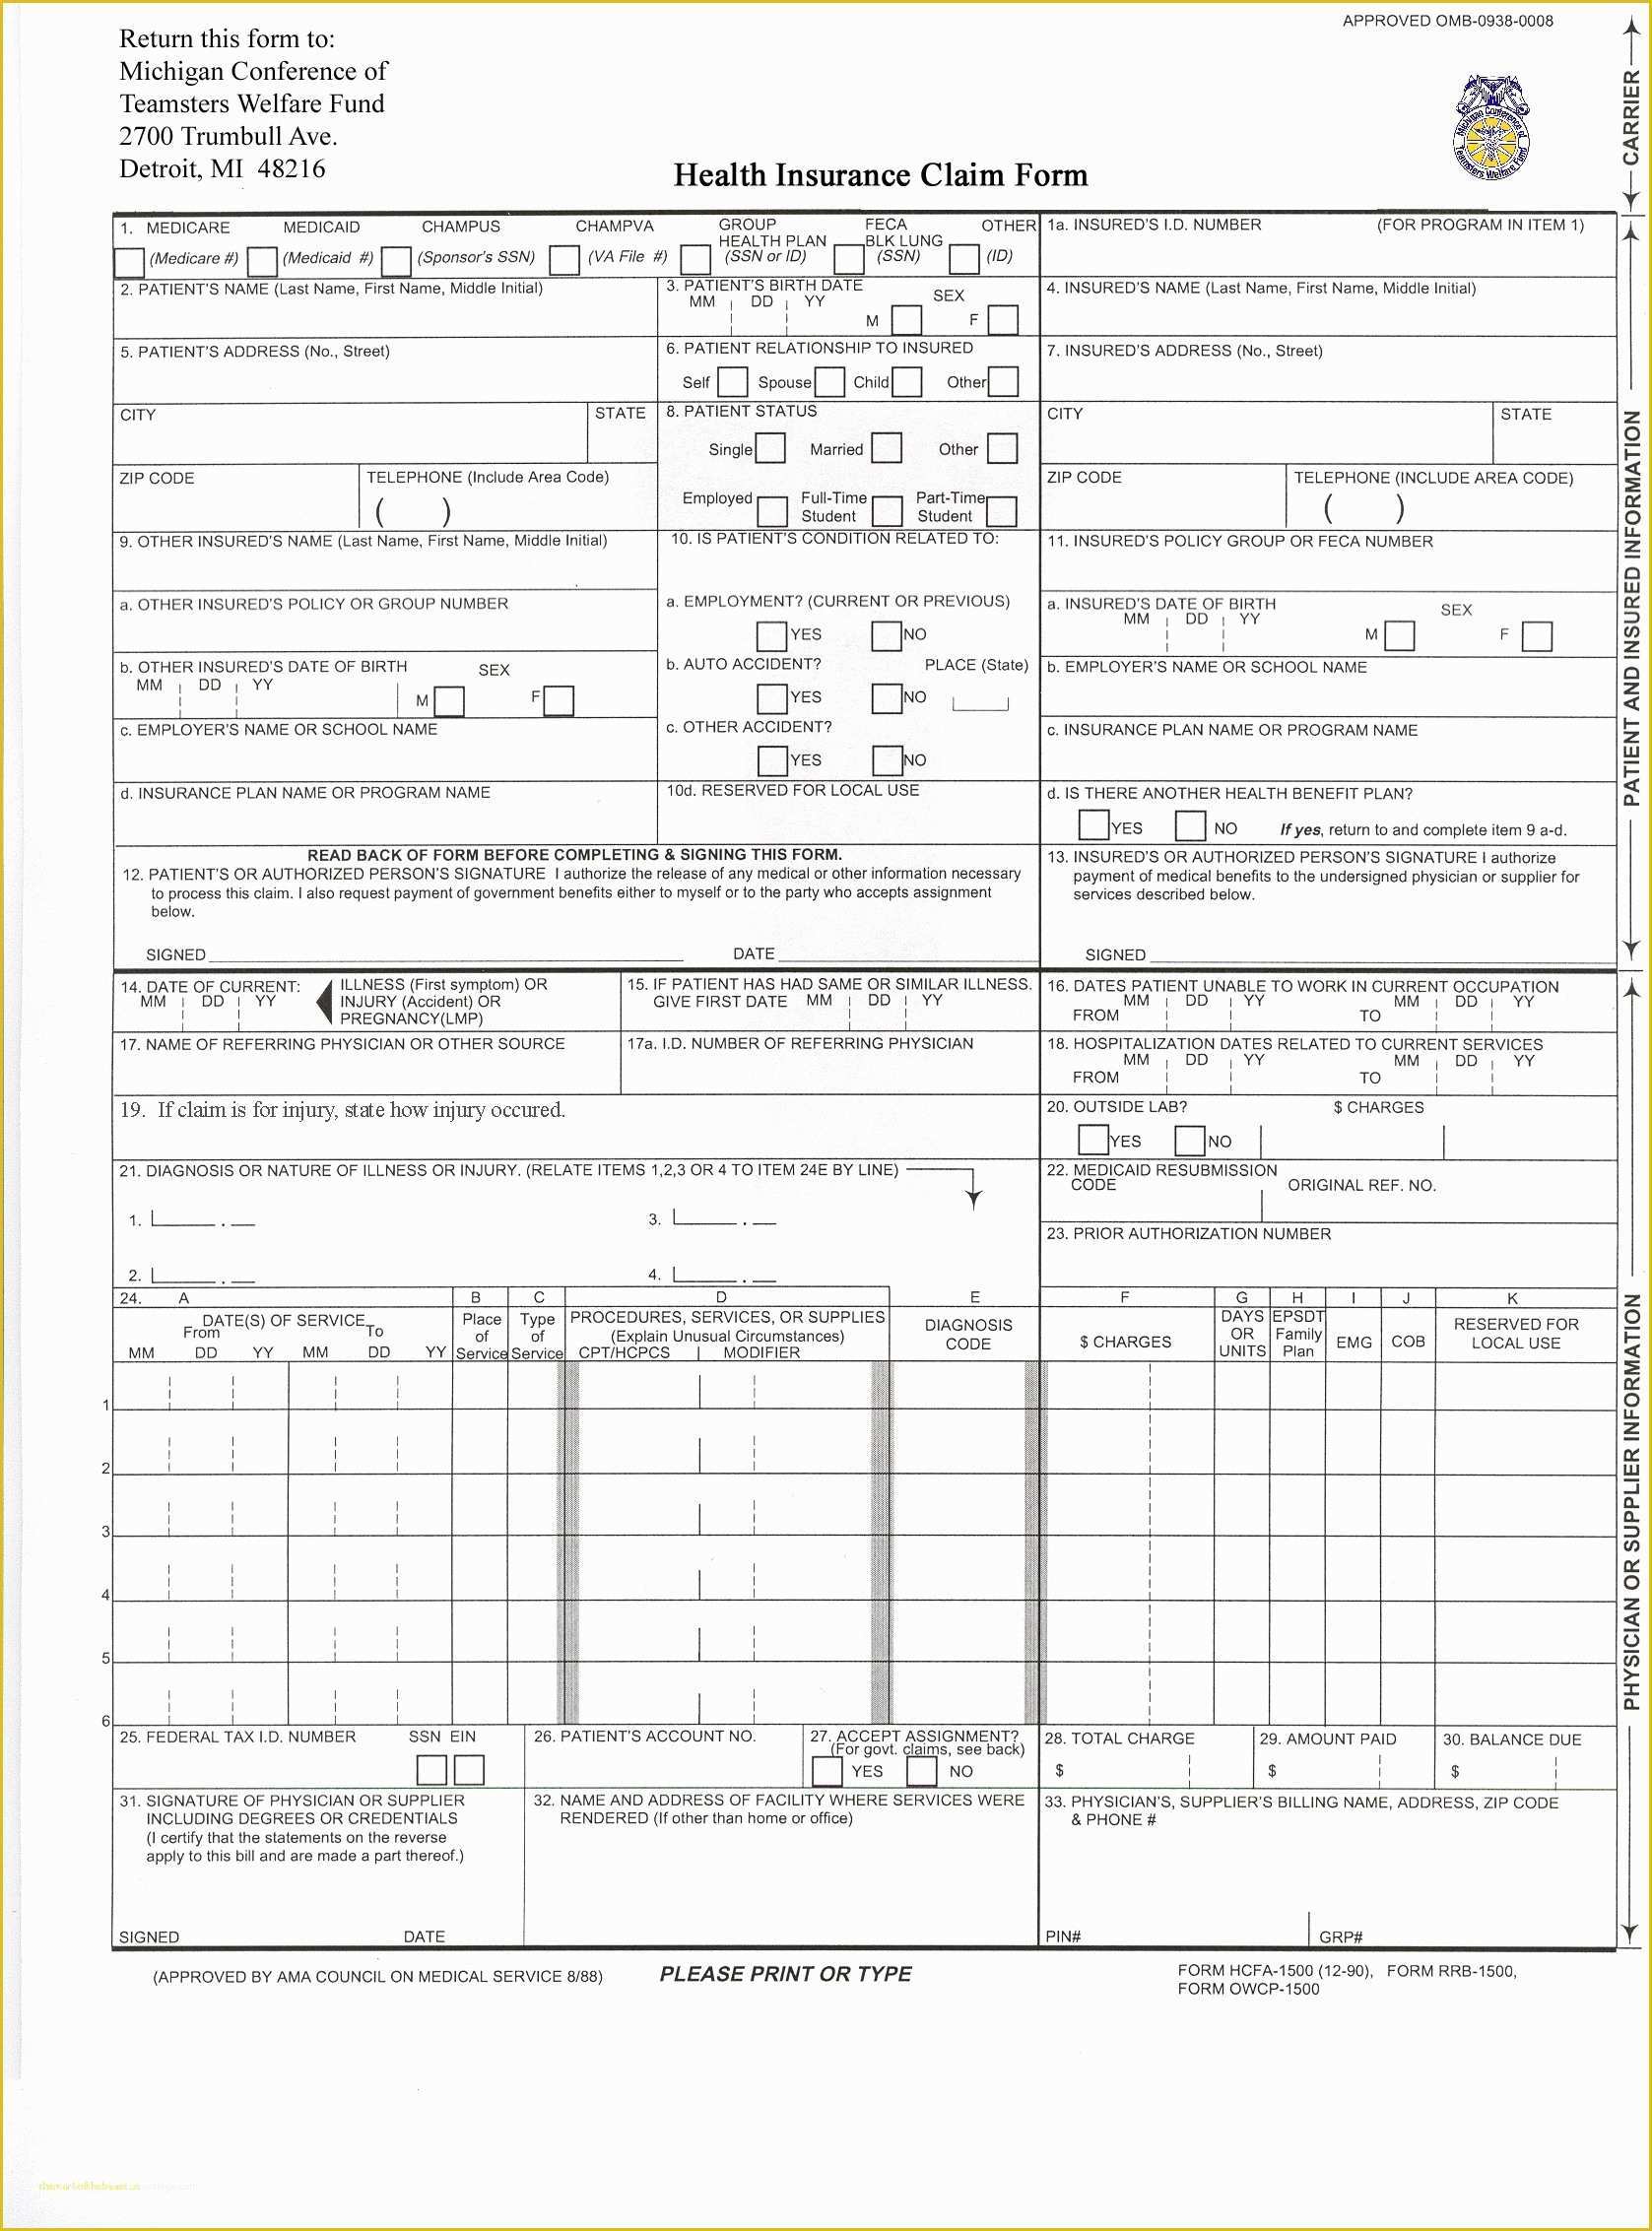 Free Cms 1500 Template for Word Of Printable Hcfa 1500 Claim form Beautiful Medical Claim